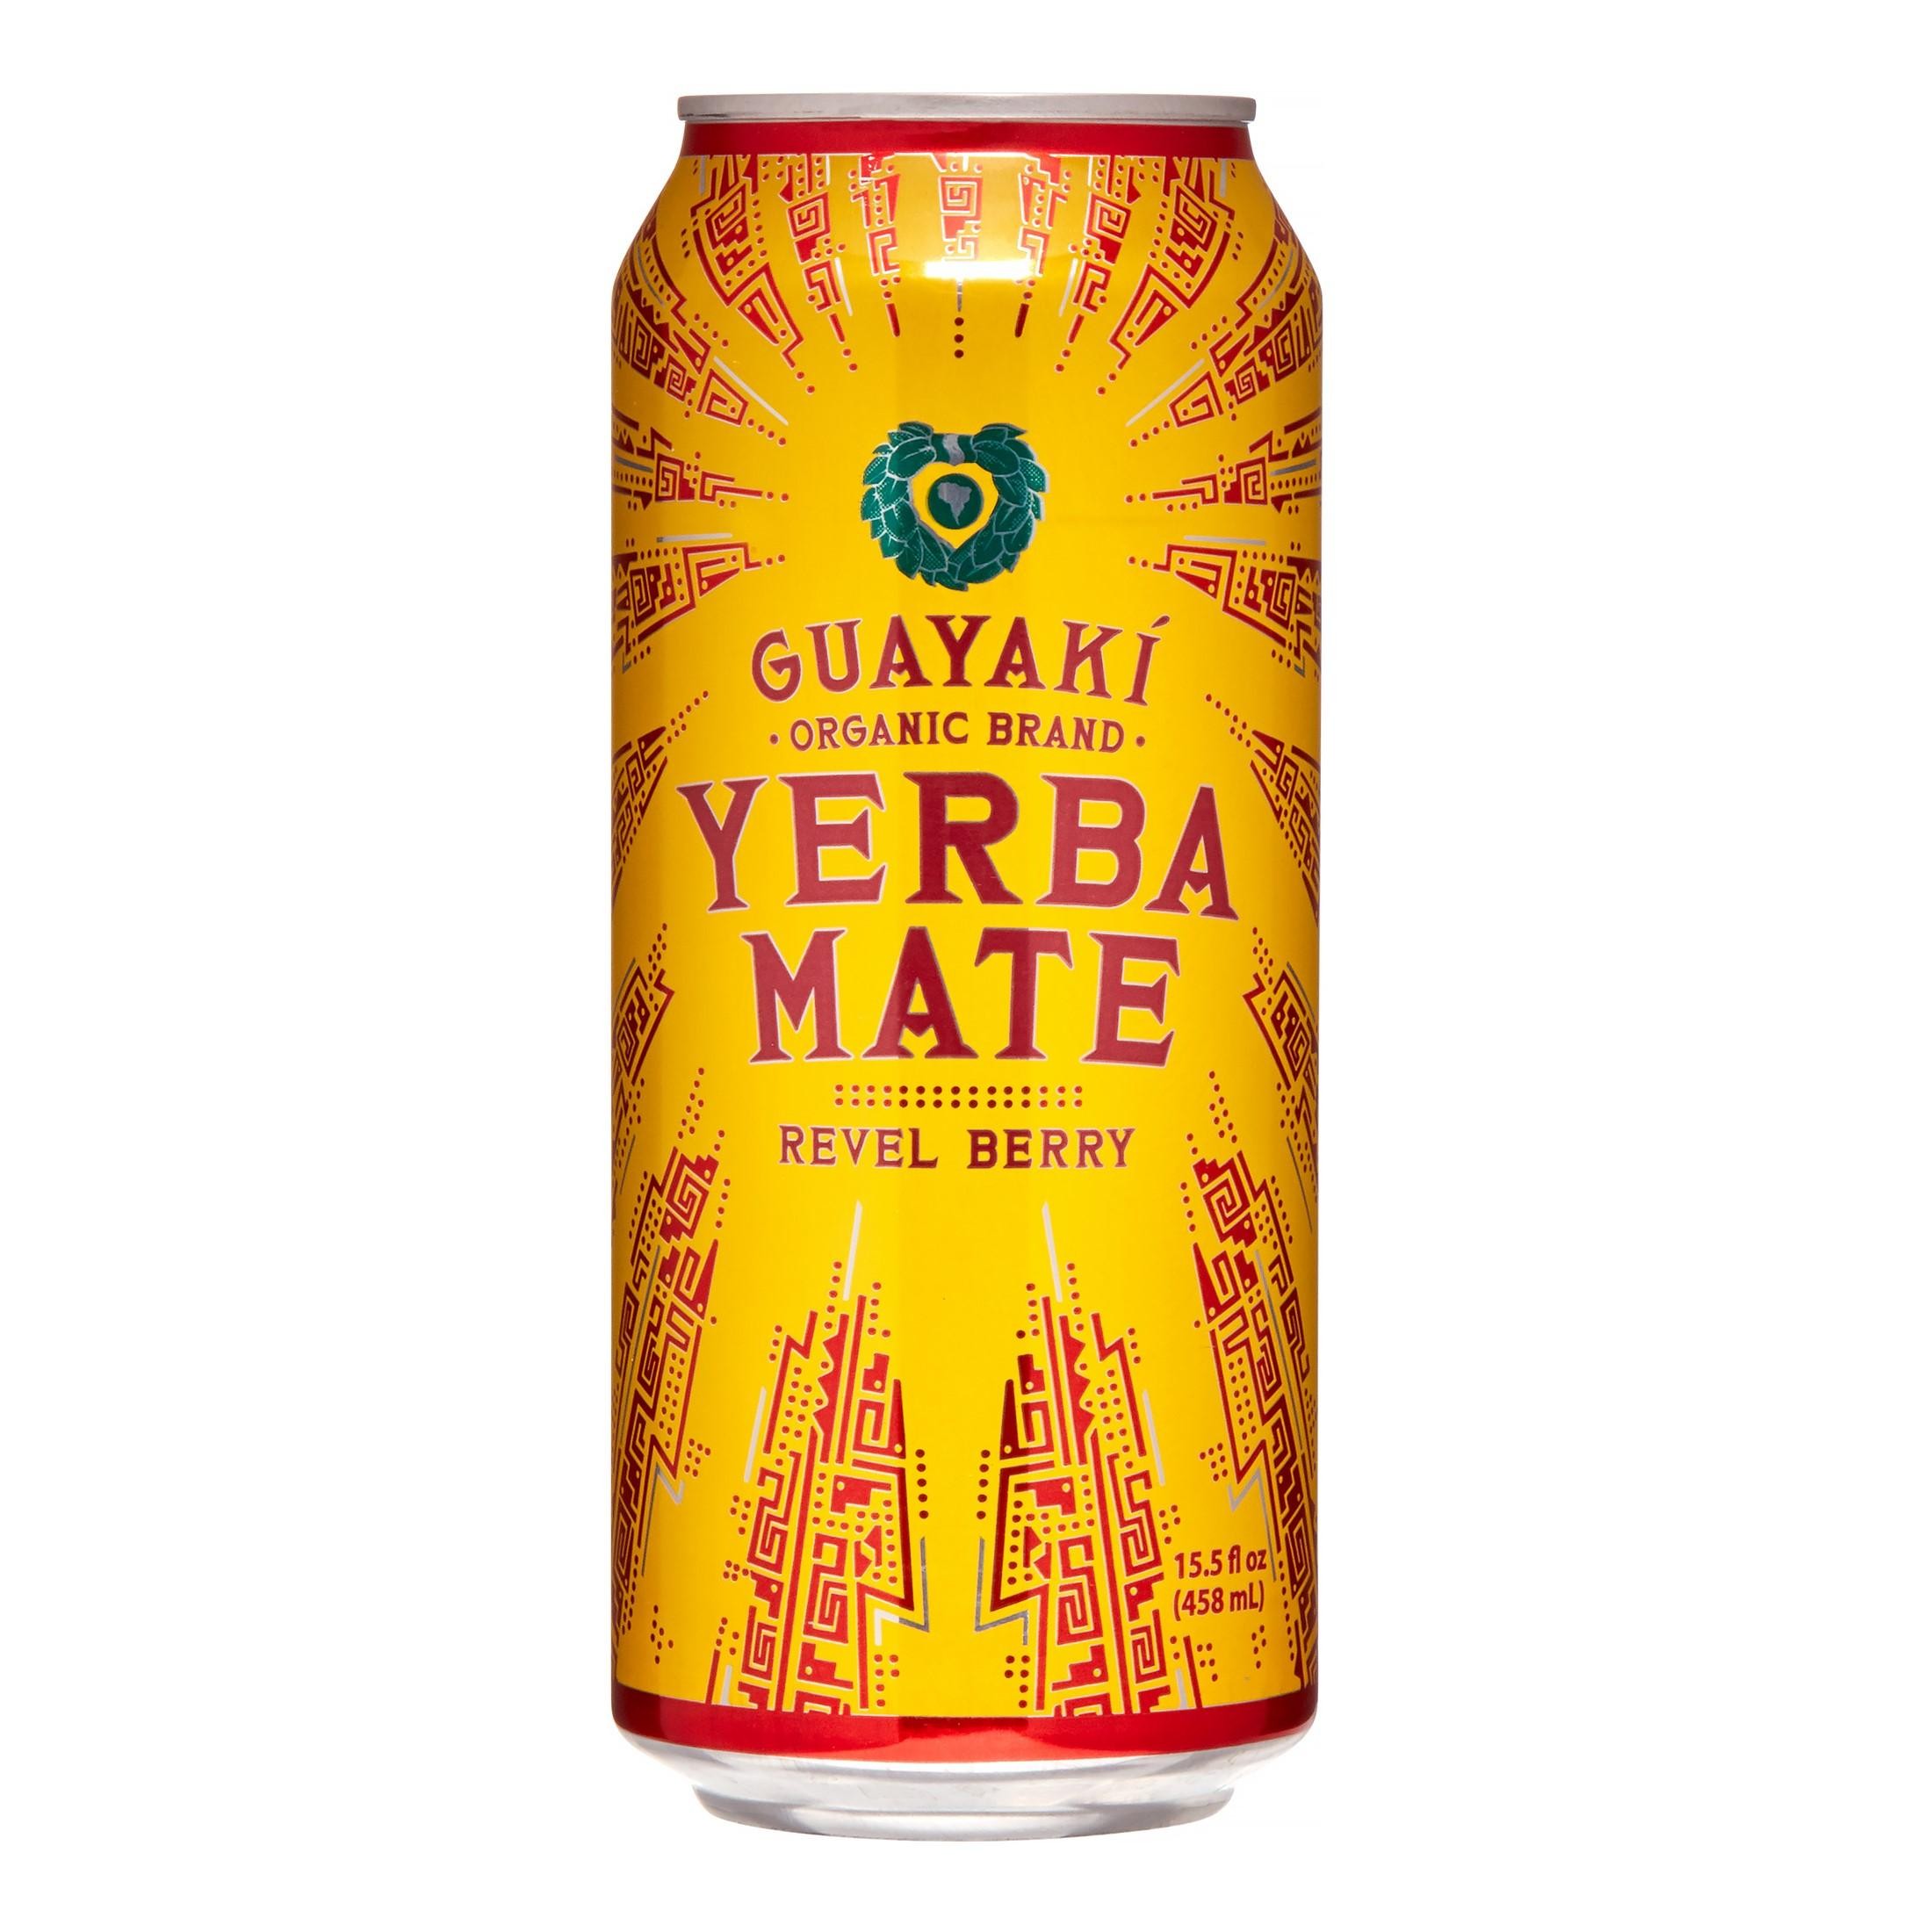 Guayaki Build-Your-Own Yerba Mate Bundle 6 Cans